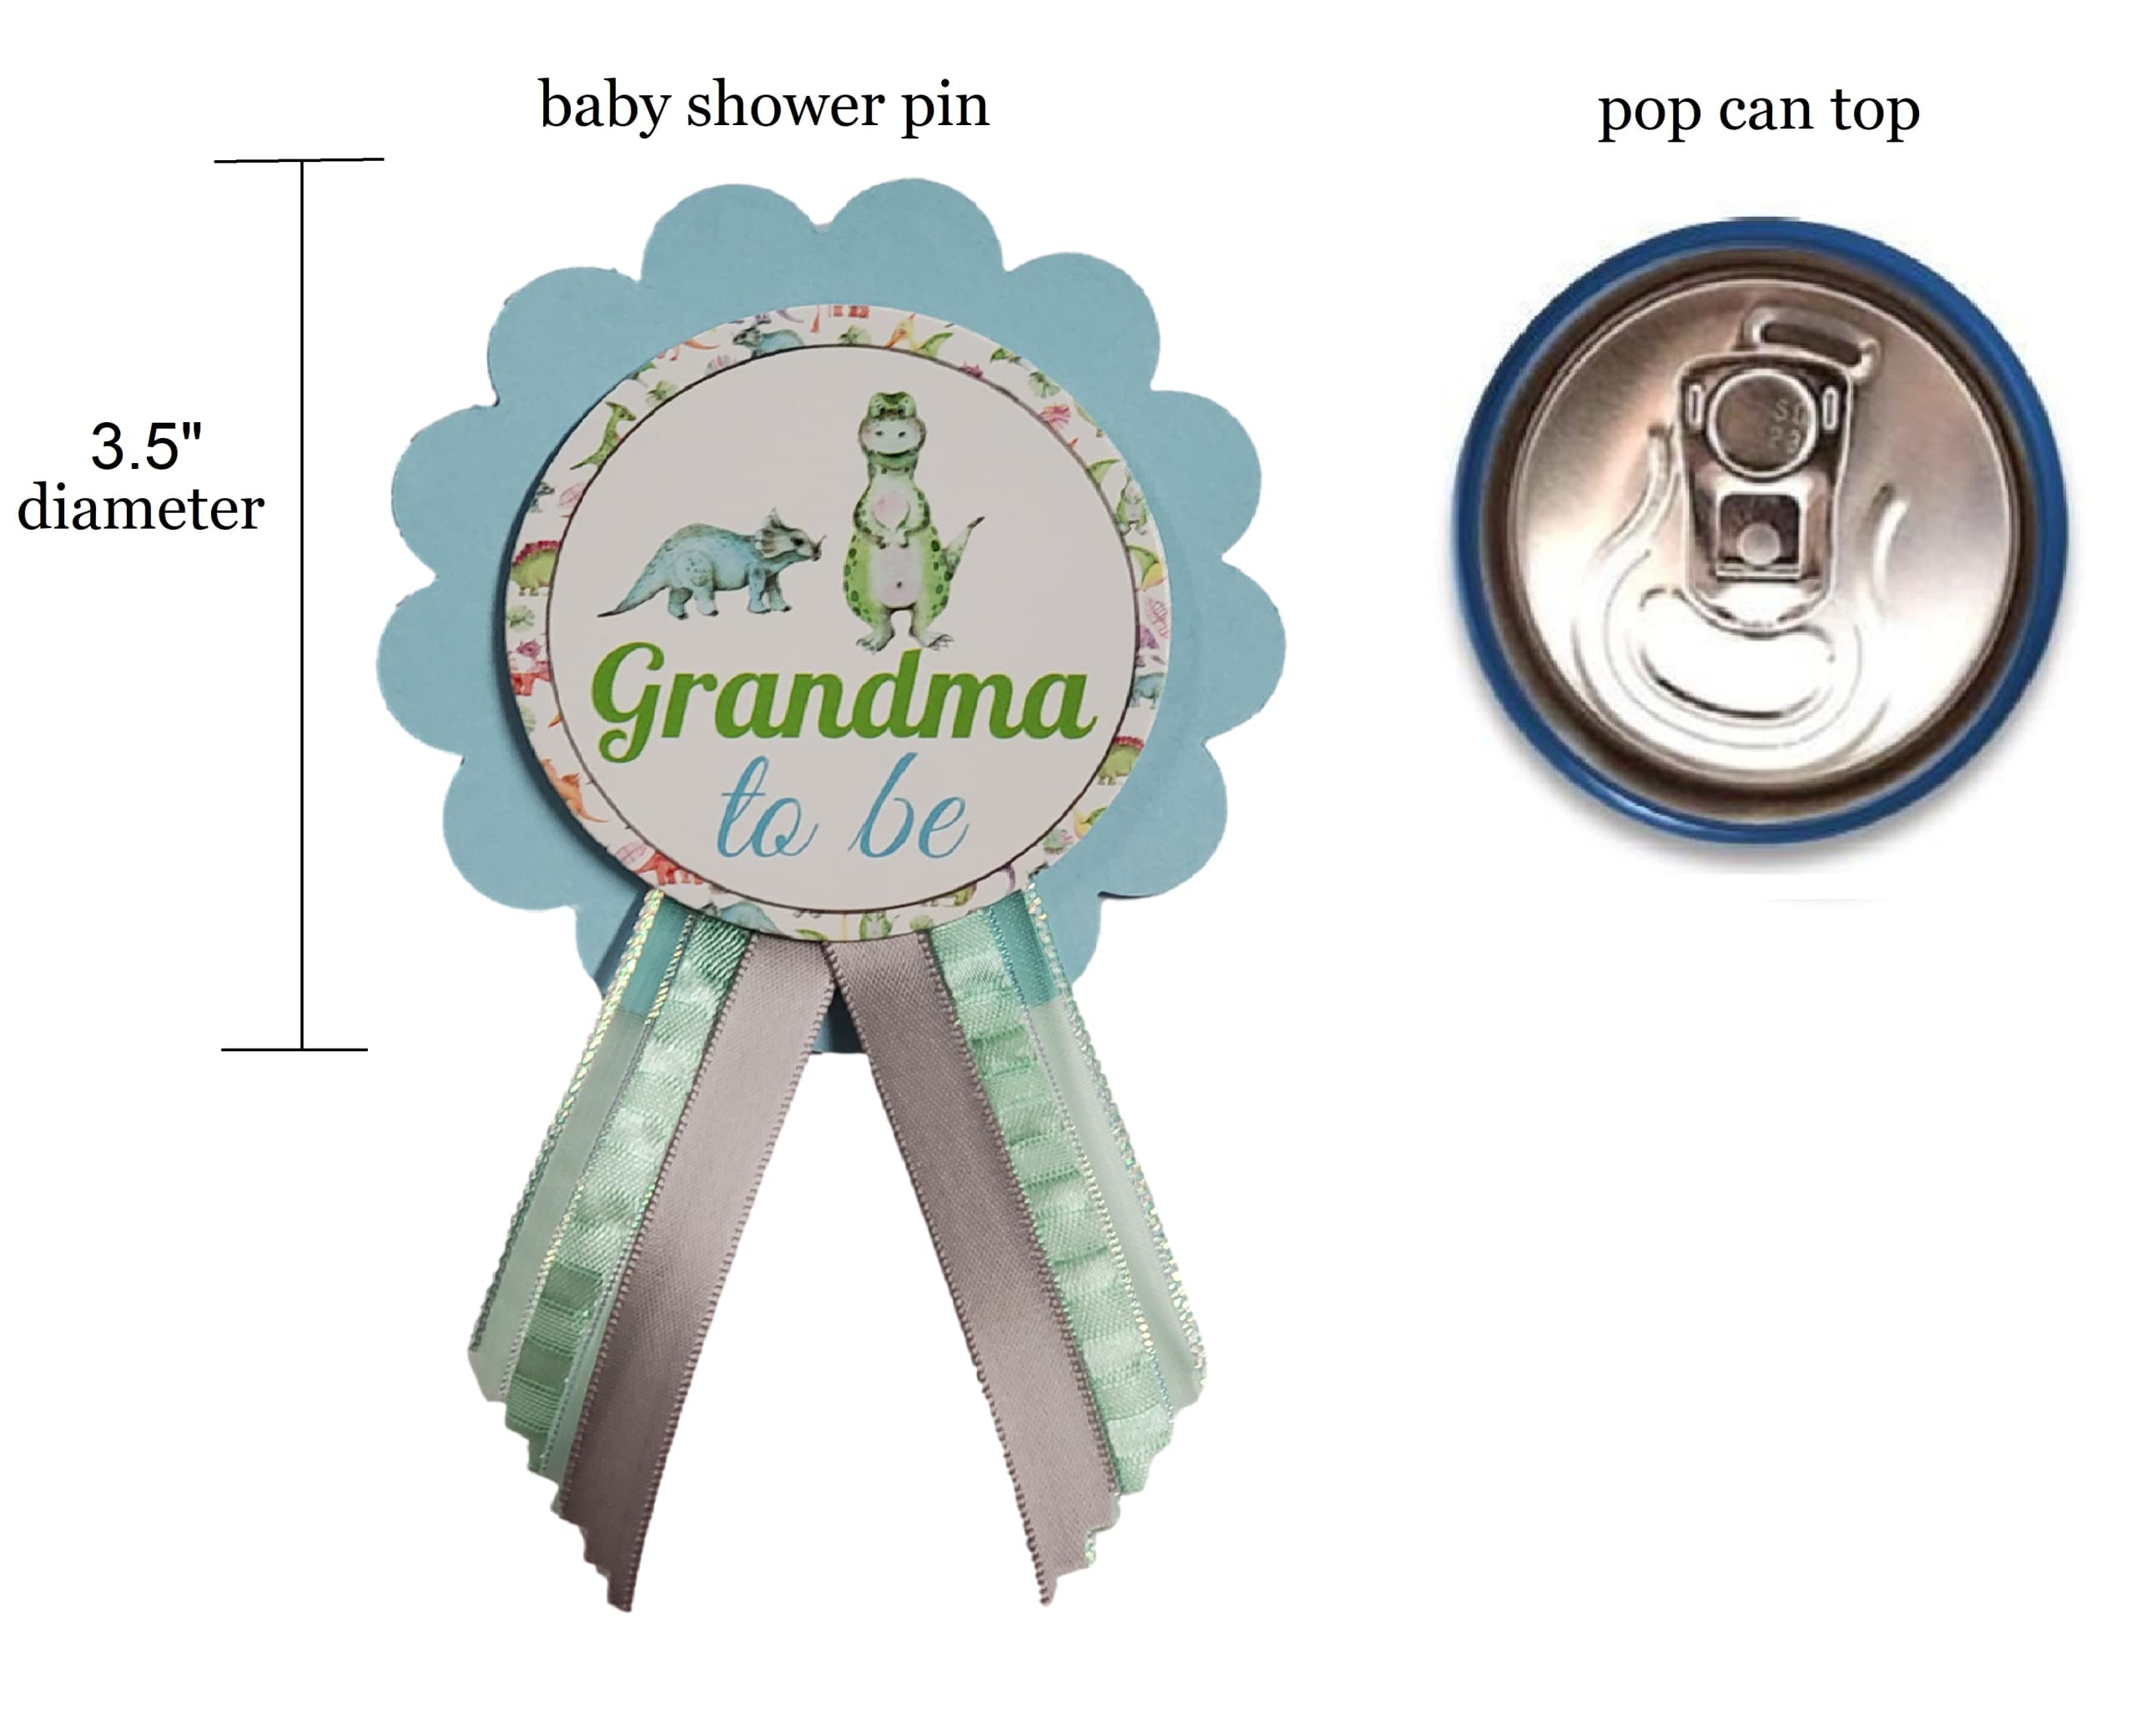 Grandma to Be Pin Dinosaur Baby Shower Pin for Nona to wear, Blue & Green, It's a Boy Baby Sprinkle Tyrannosaurus Decorations Badge Button